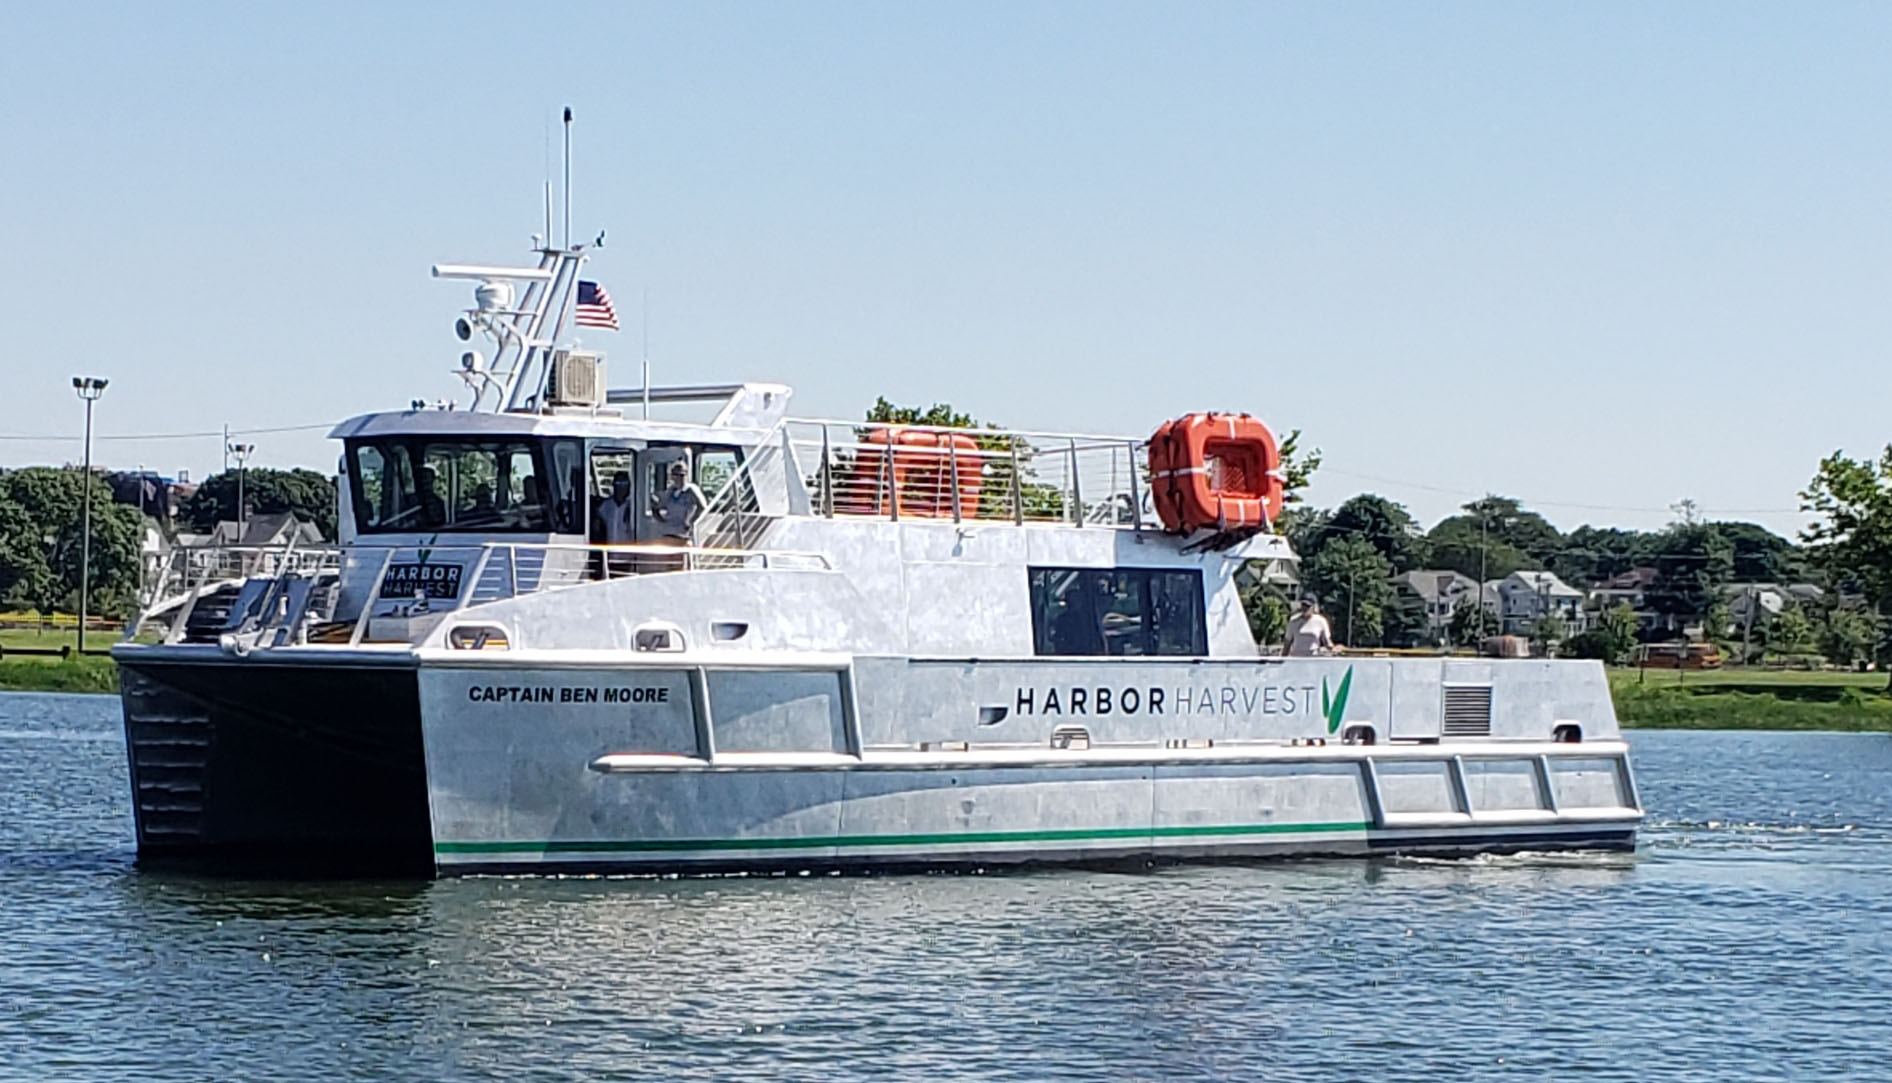 In sightseeing boats, commuter vessels, ferries, tugboats, and more, our Electric Marine, Electric Hybrid Marine, and Hydrogen Fuel Cell Marine propulsion systems help save fuel, costs, and the environment.